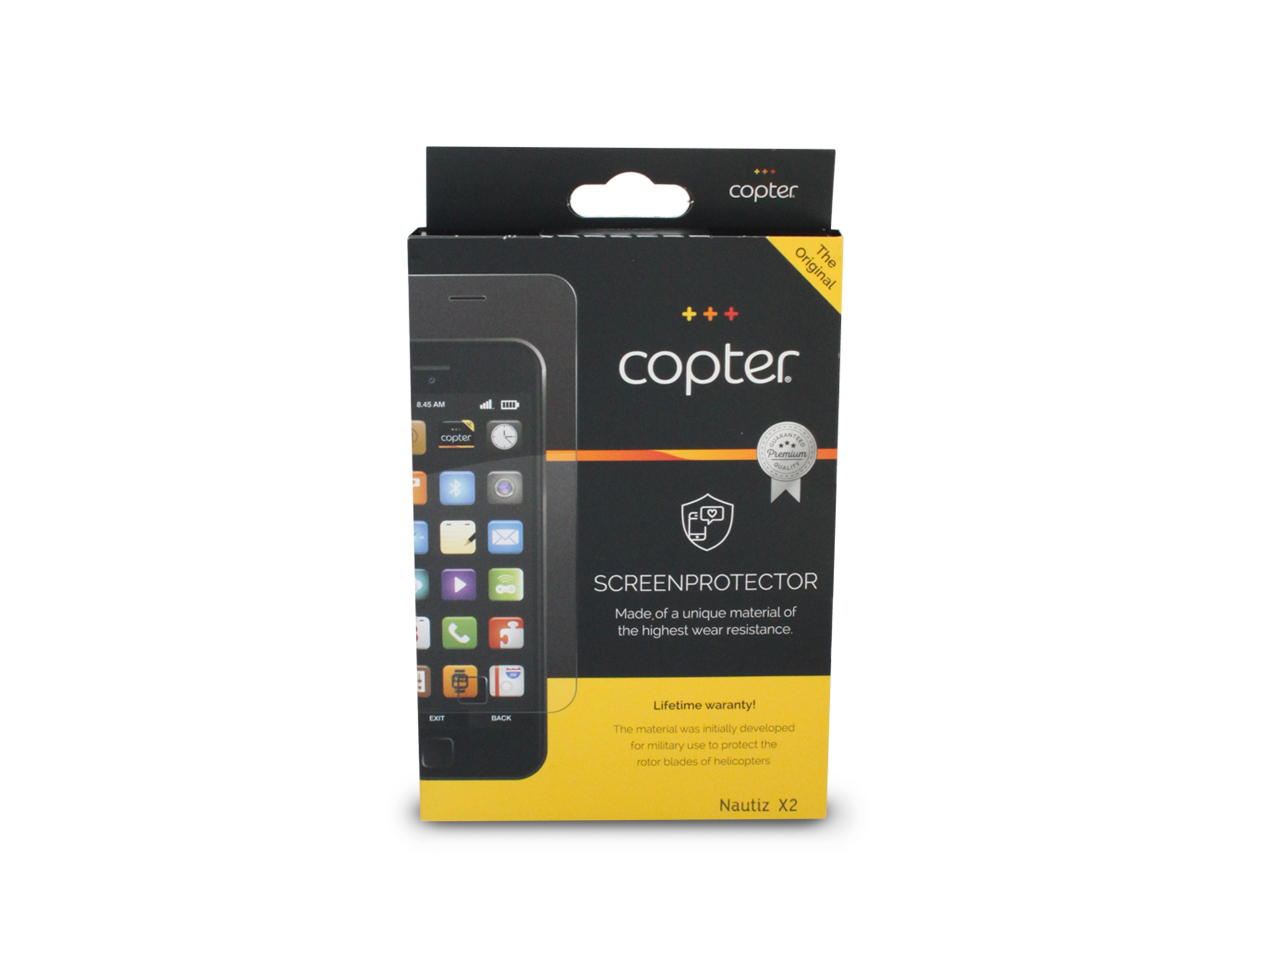 NX2-2006-Copter-Screen-Protector.jpg